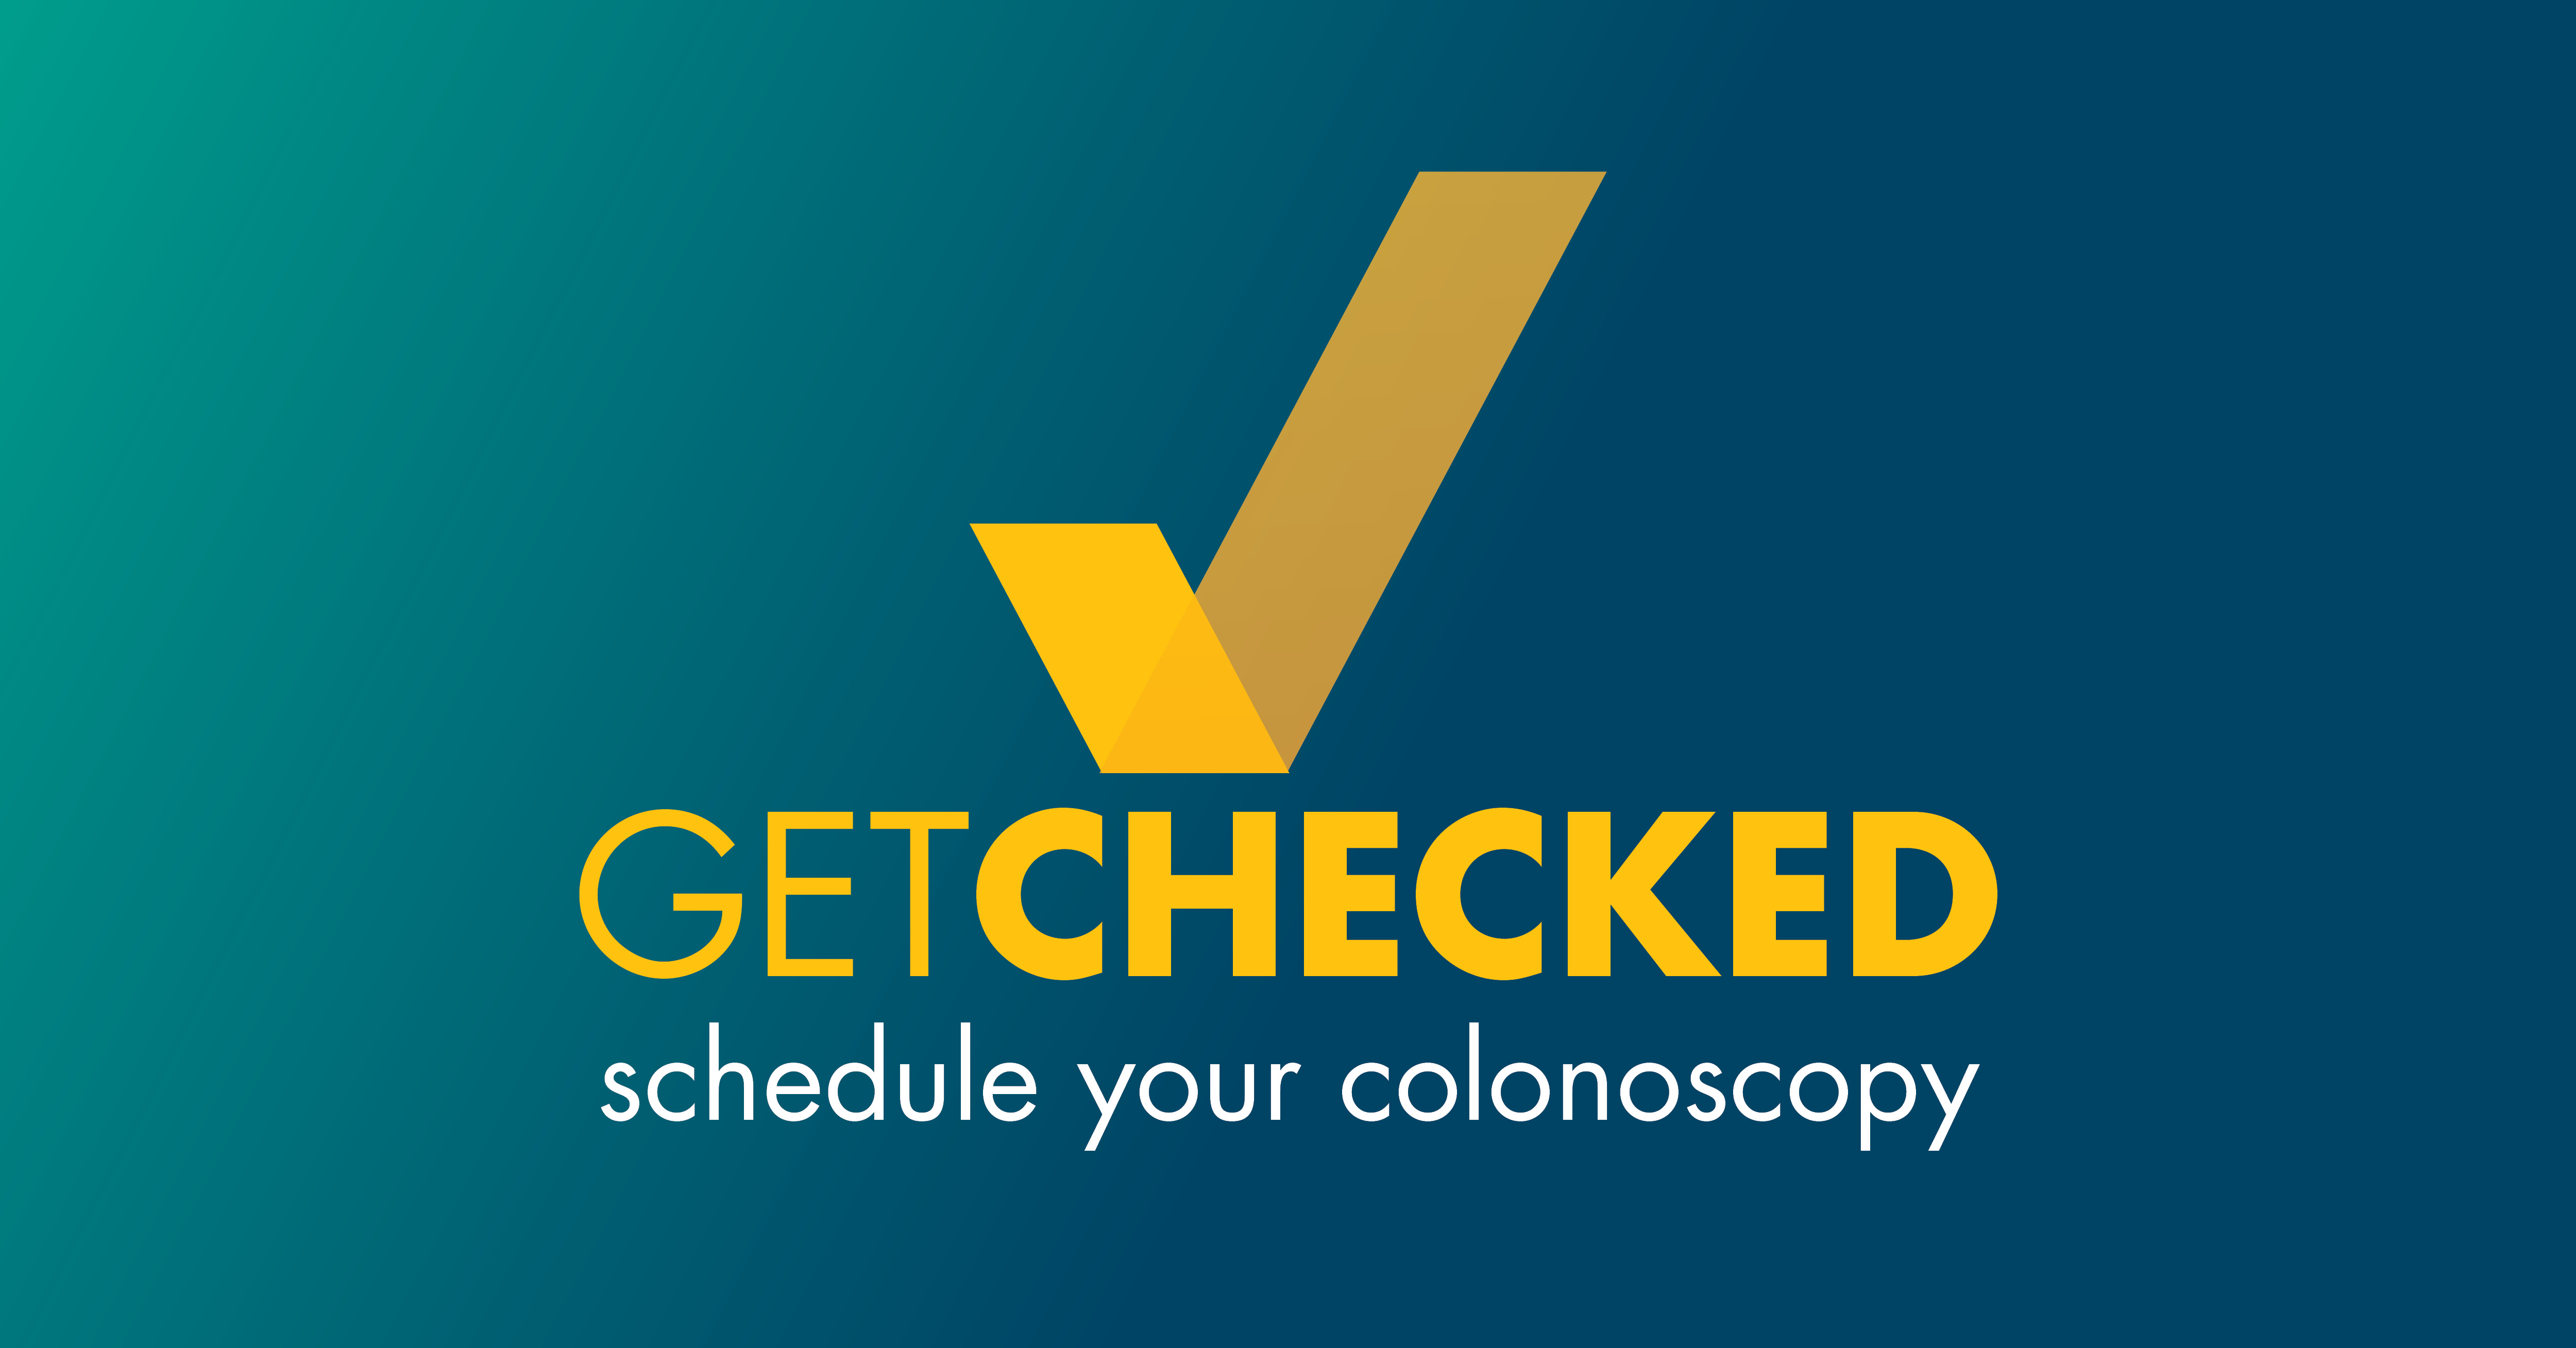 Graphic encouraging individuals to get checked and schedule a colonoscopy